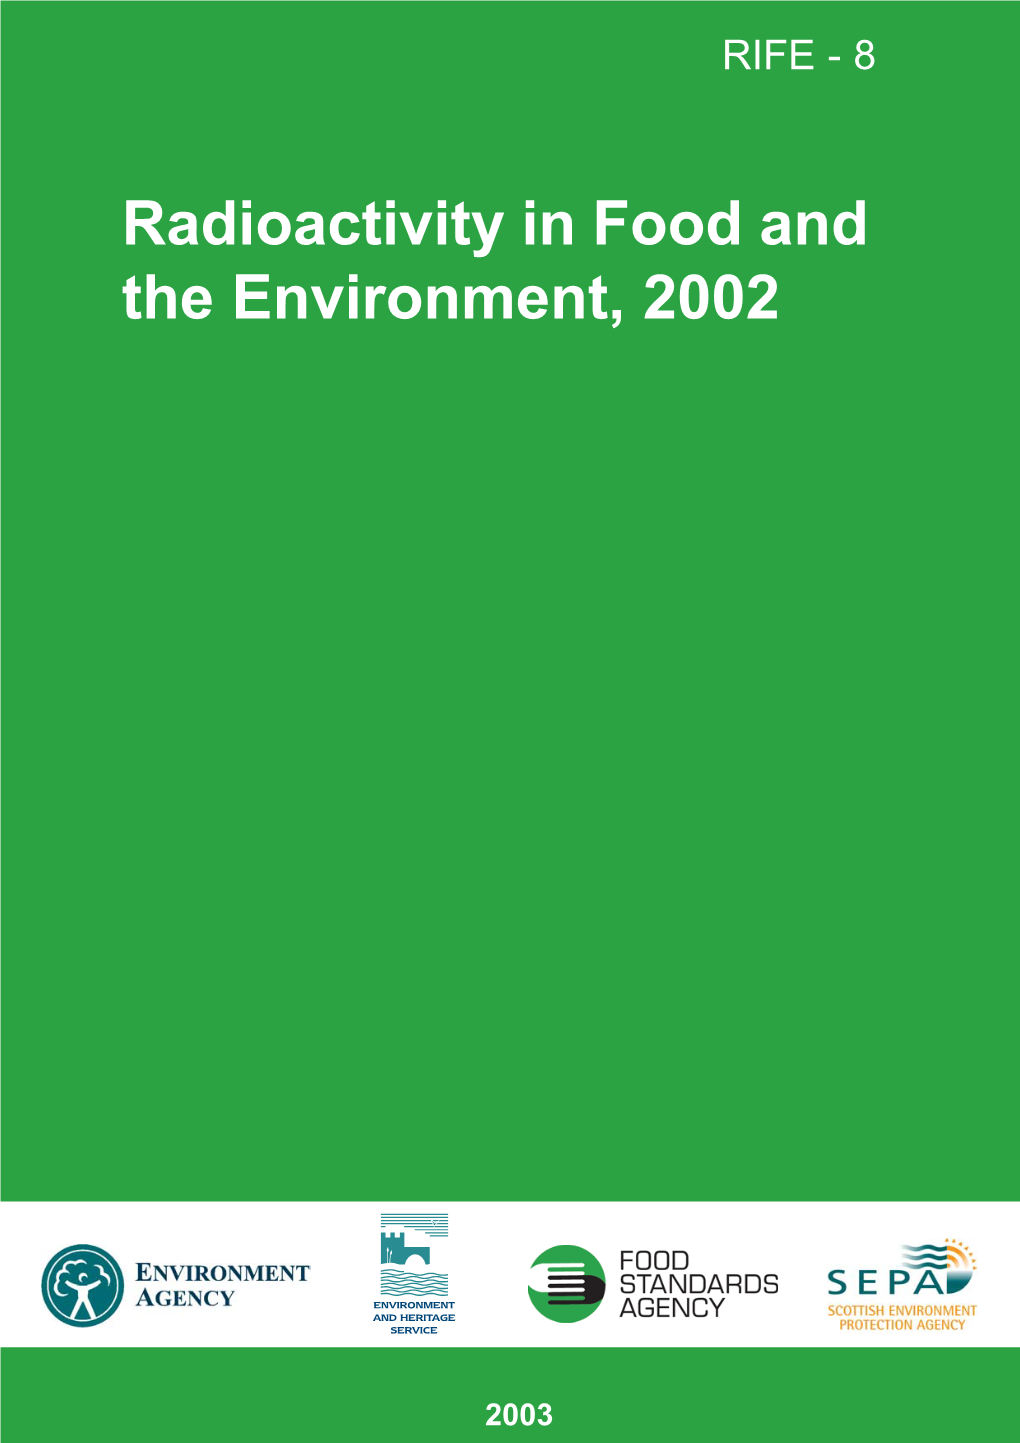 Radioactivity in Food and the Environment, 2002